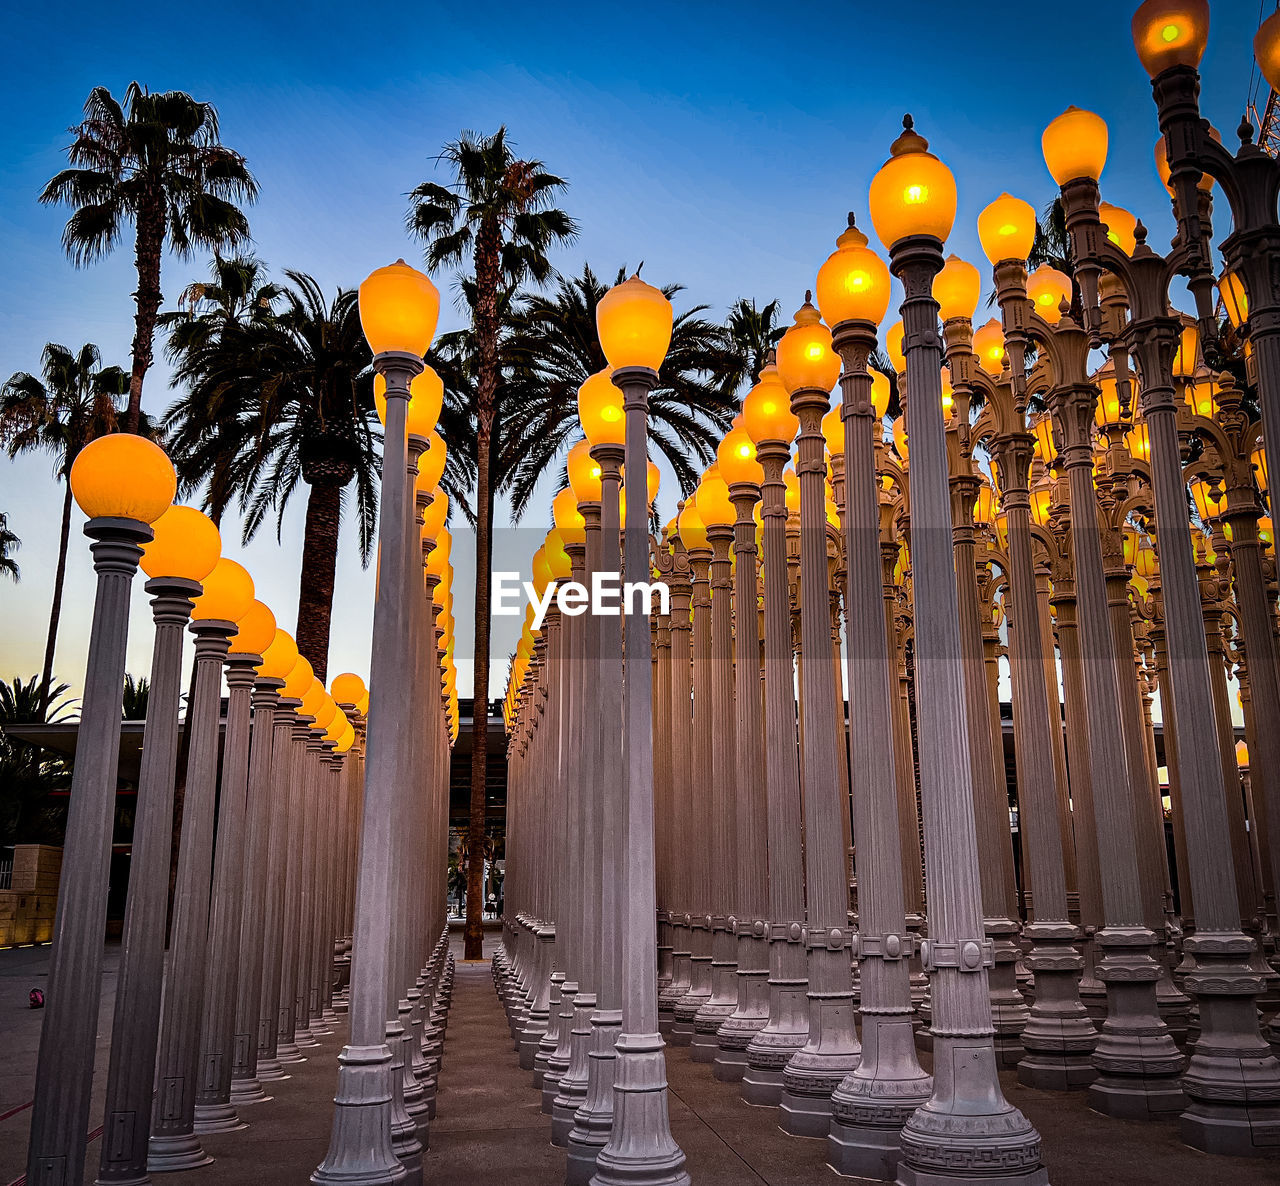 Street view of urban light. forest of city streetlights at lacma. museums of art